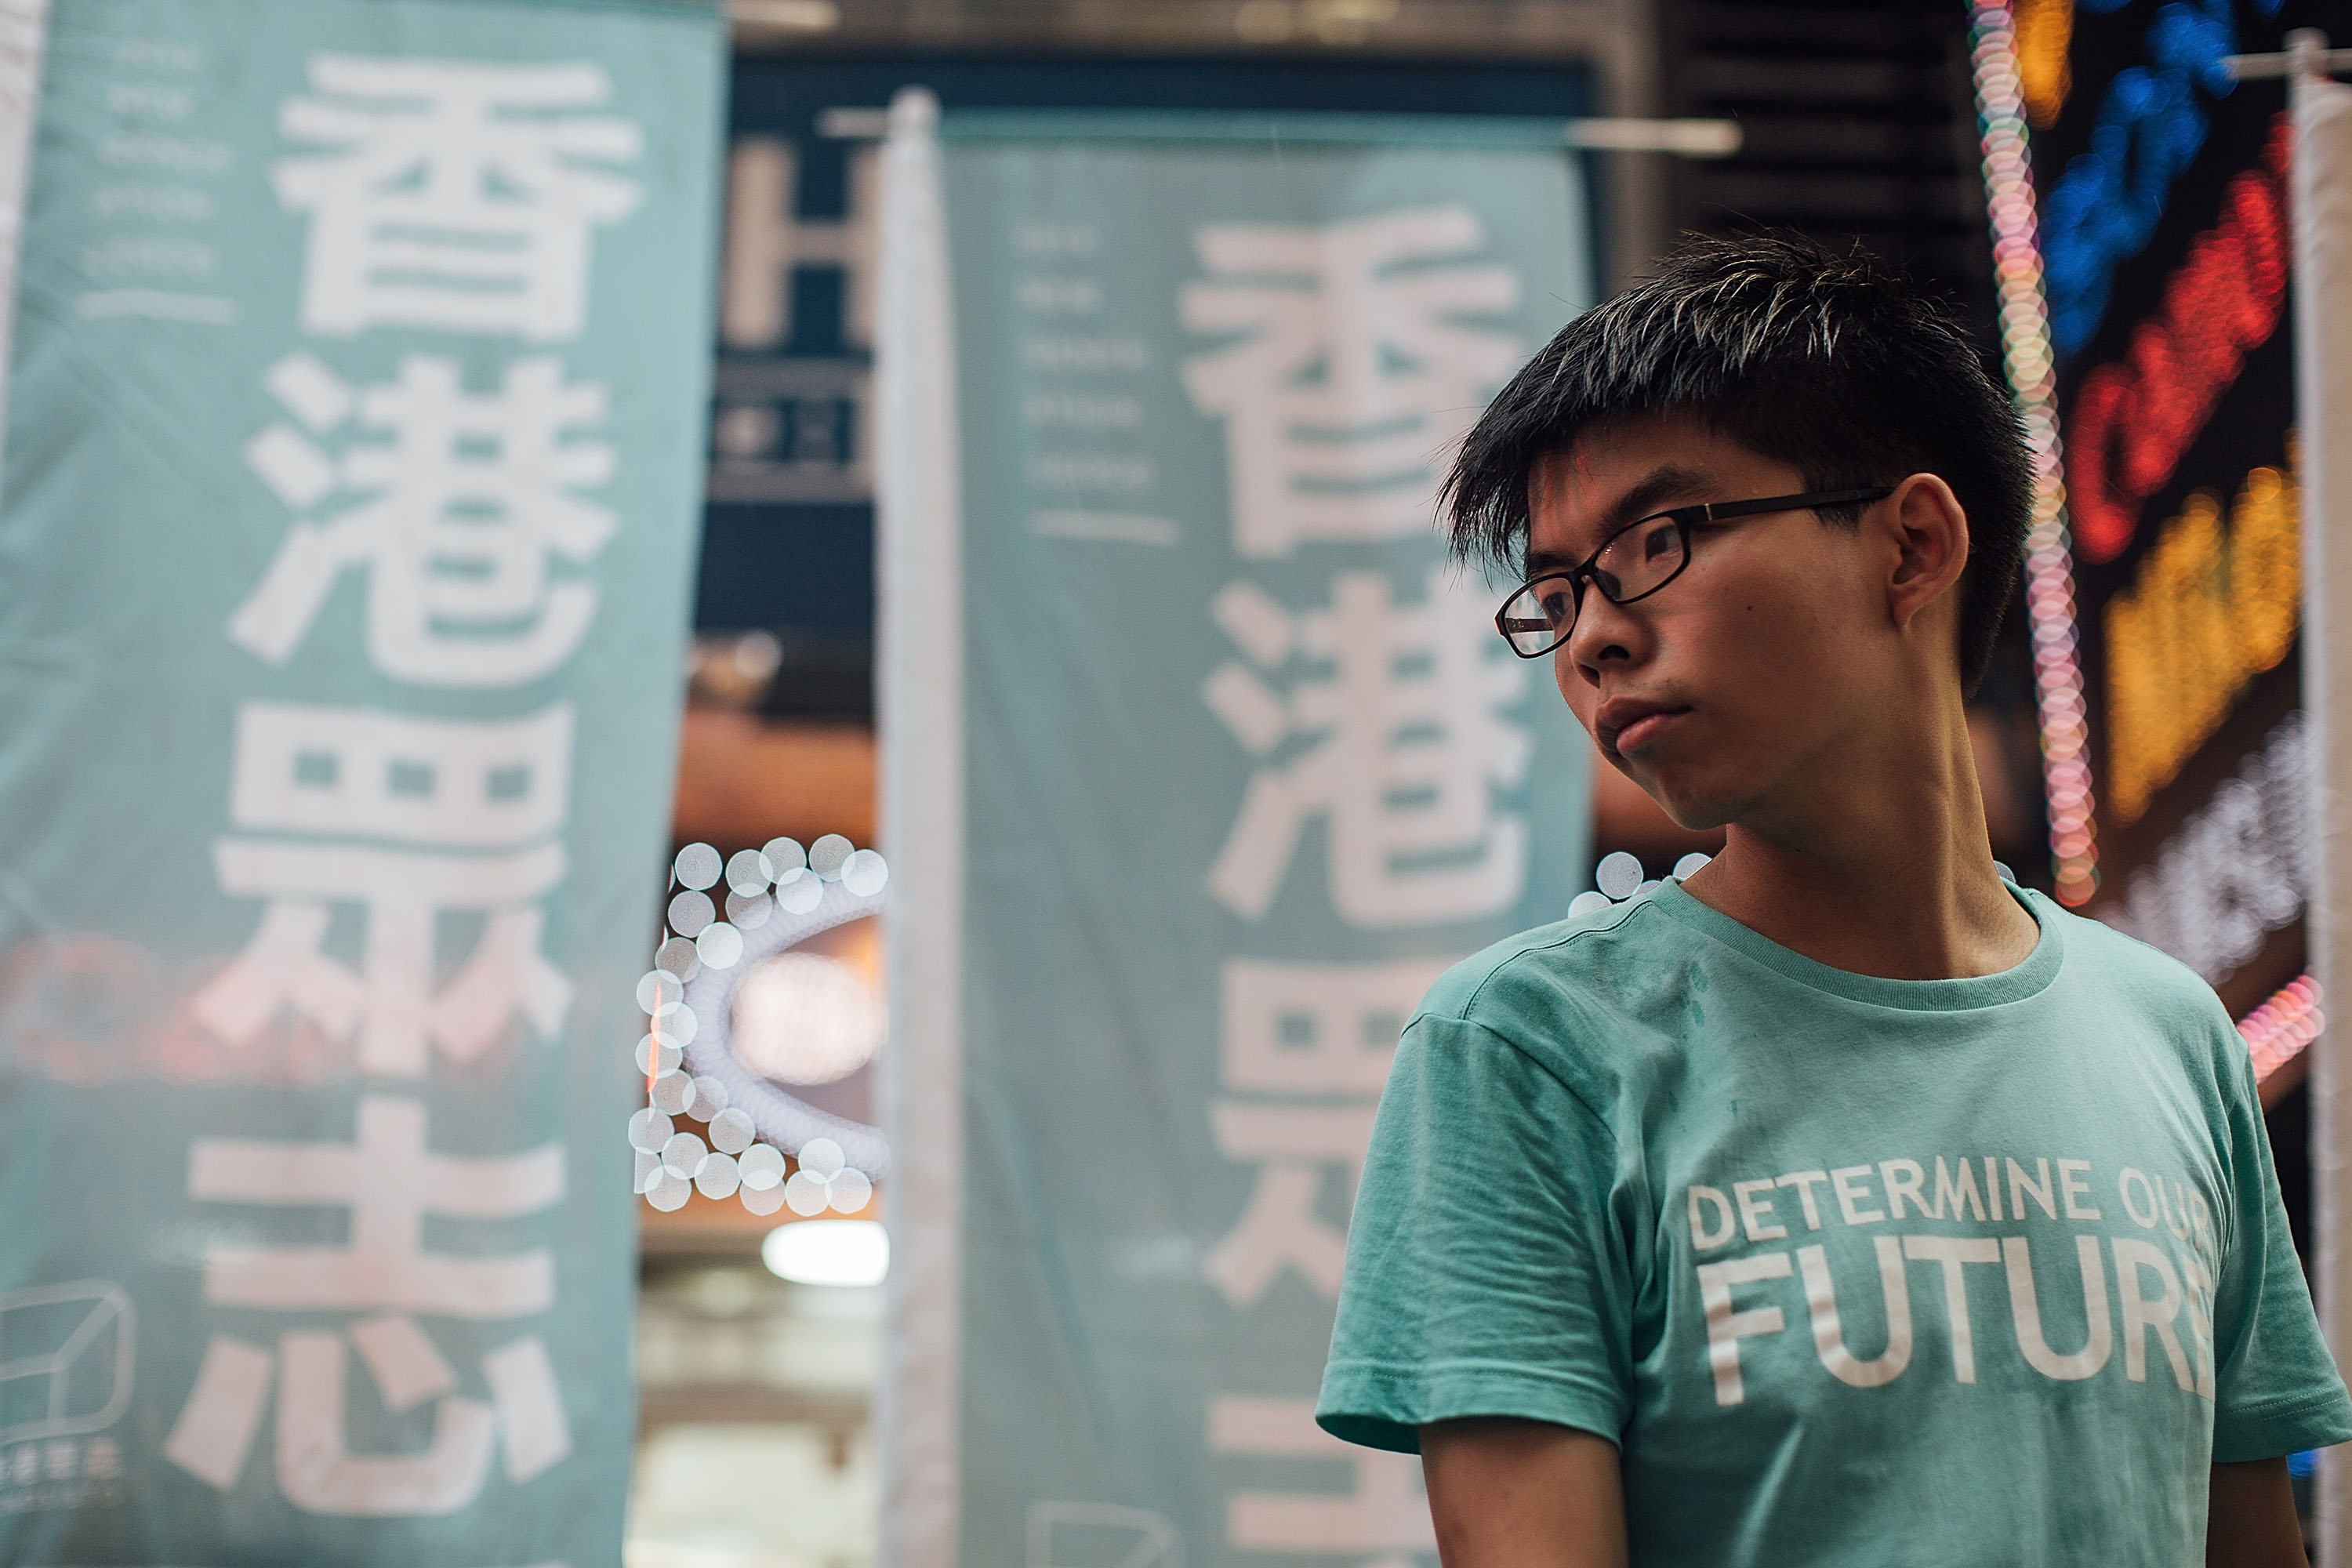 Demosistō founder Joshua Wong pictured on June 4, 2016, ahead of an annual candlelight vigil in Hong Kong to commemorate the killing of protesters in Beijing's Tiananmen Square in 1989 (Anthony Kwan—Getty Images)